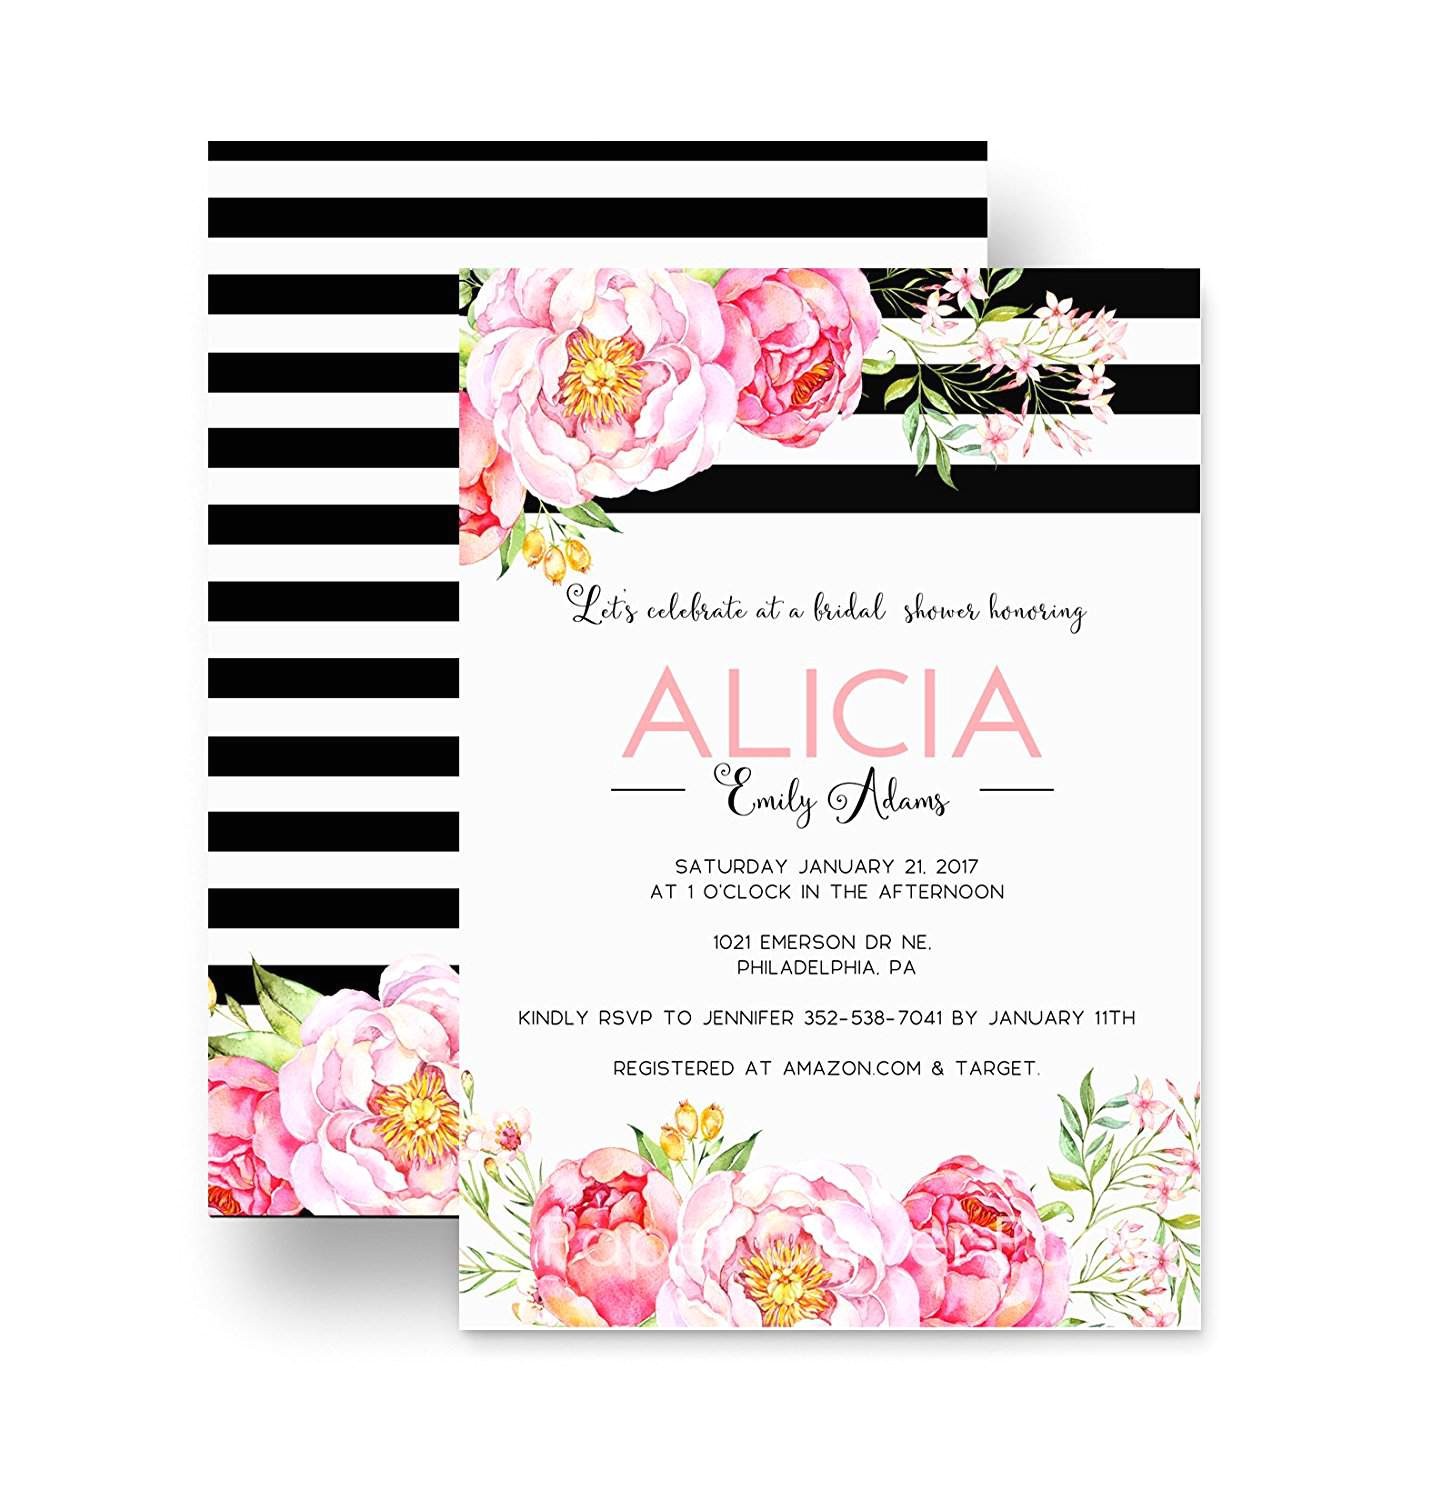 top best bridal shower invitations wedding cheap cheap rustic invite online inexpensive